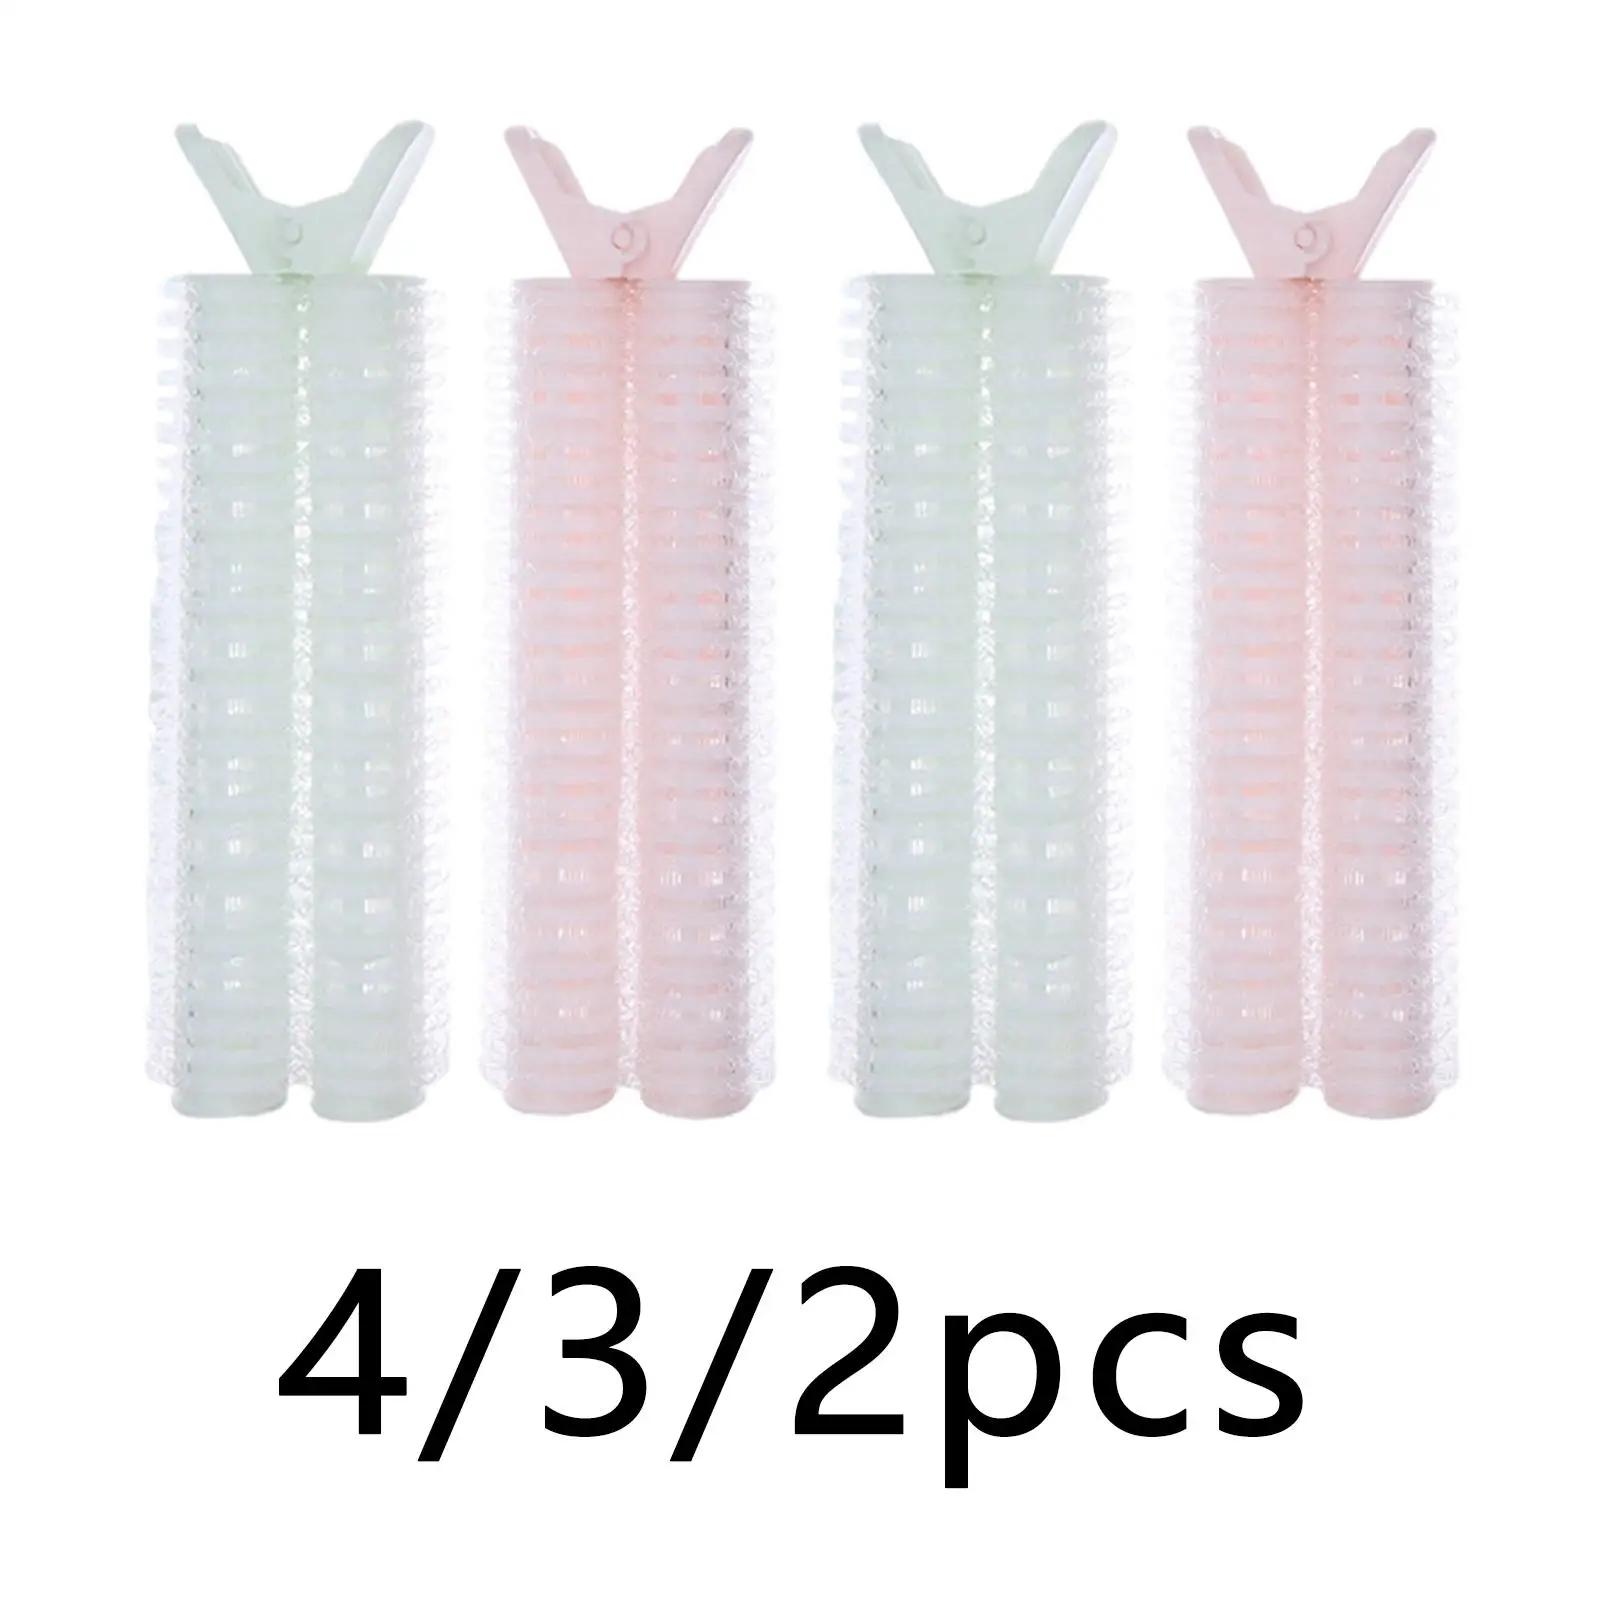 Hair Roots Clips, Nylon Duckbill Shape Natural Plastic Barrettes Styling Tool for Hair Styling Travel Vocation ,